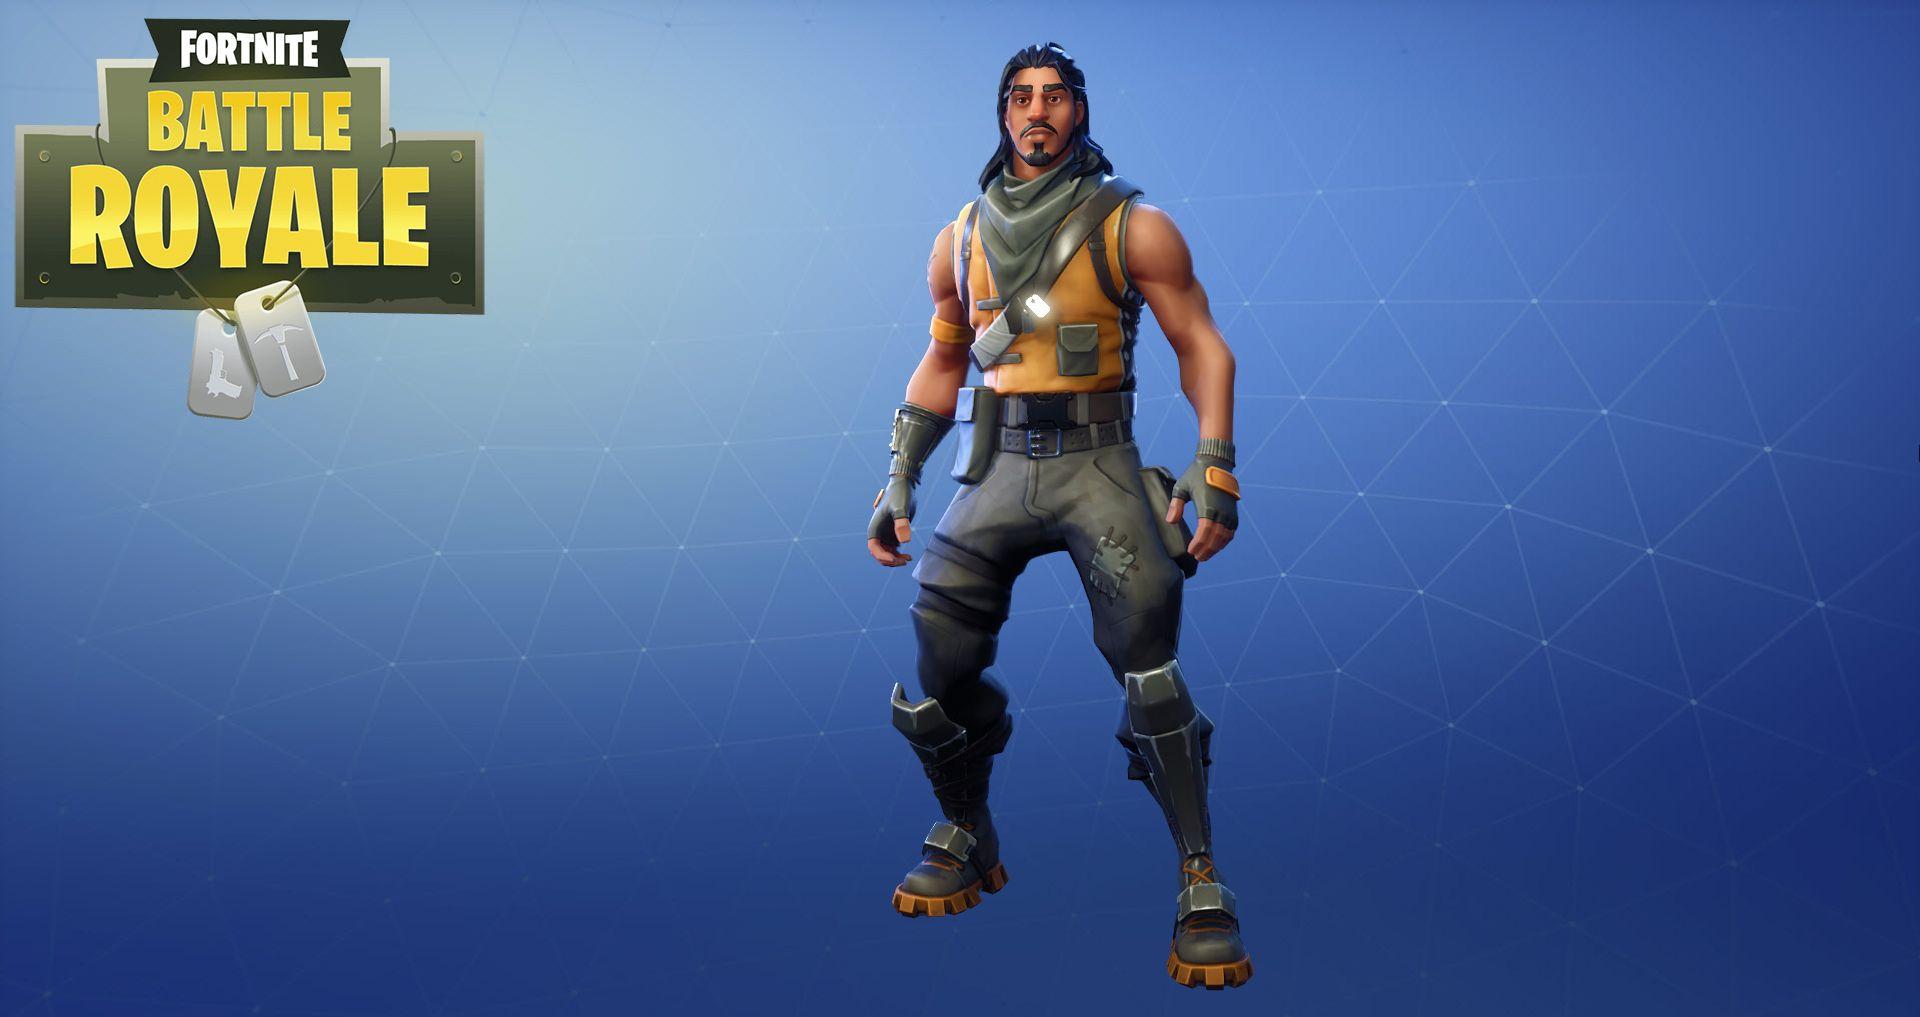 Tracker Fortnite Outfit Skin How to Get + Info